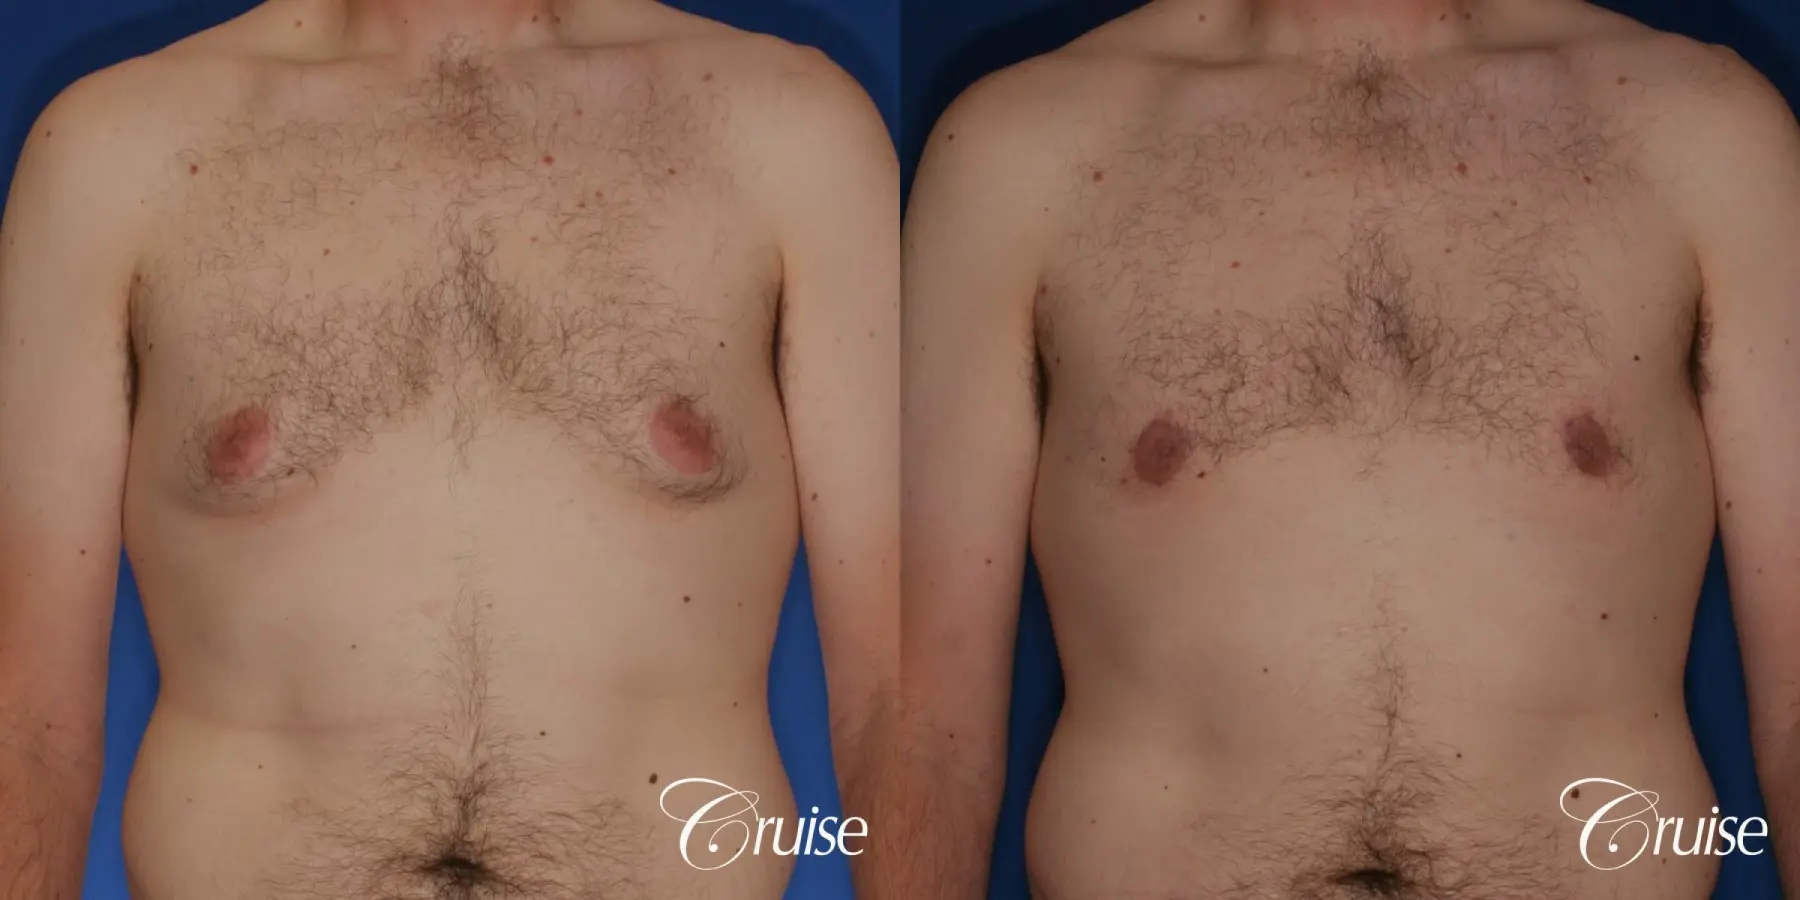 gynecomastia with skin laxity - Before and After 1